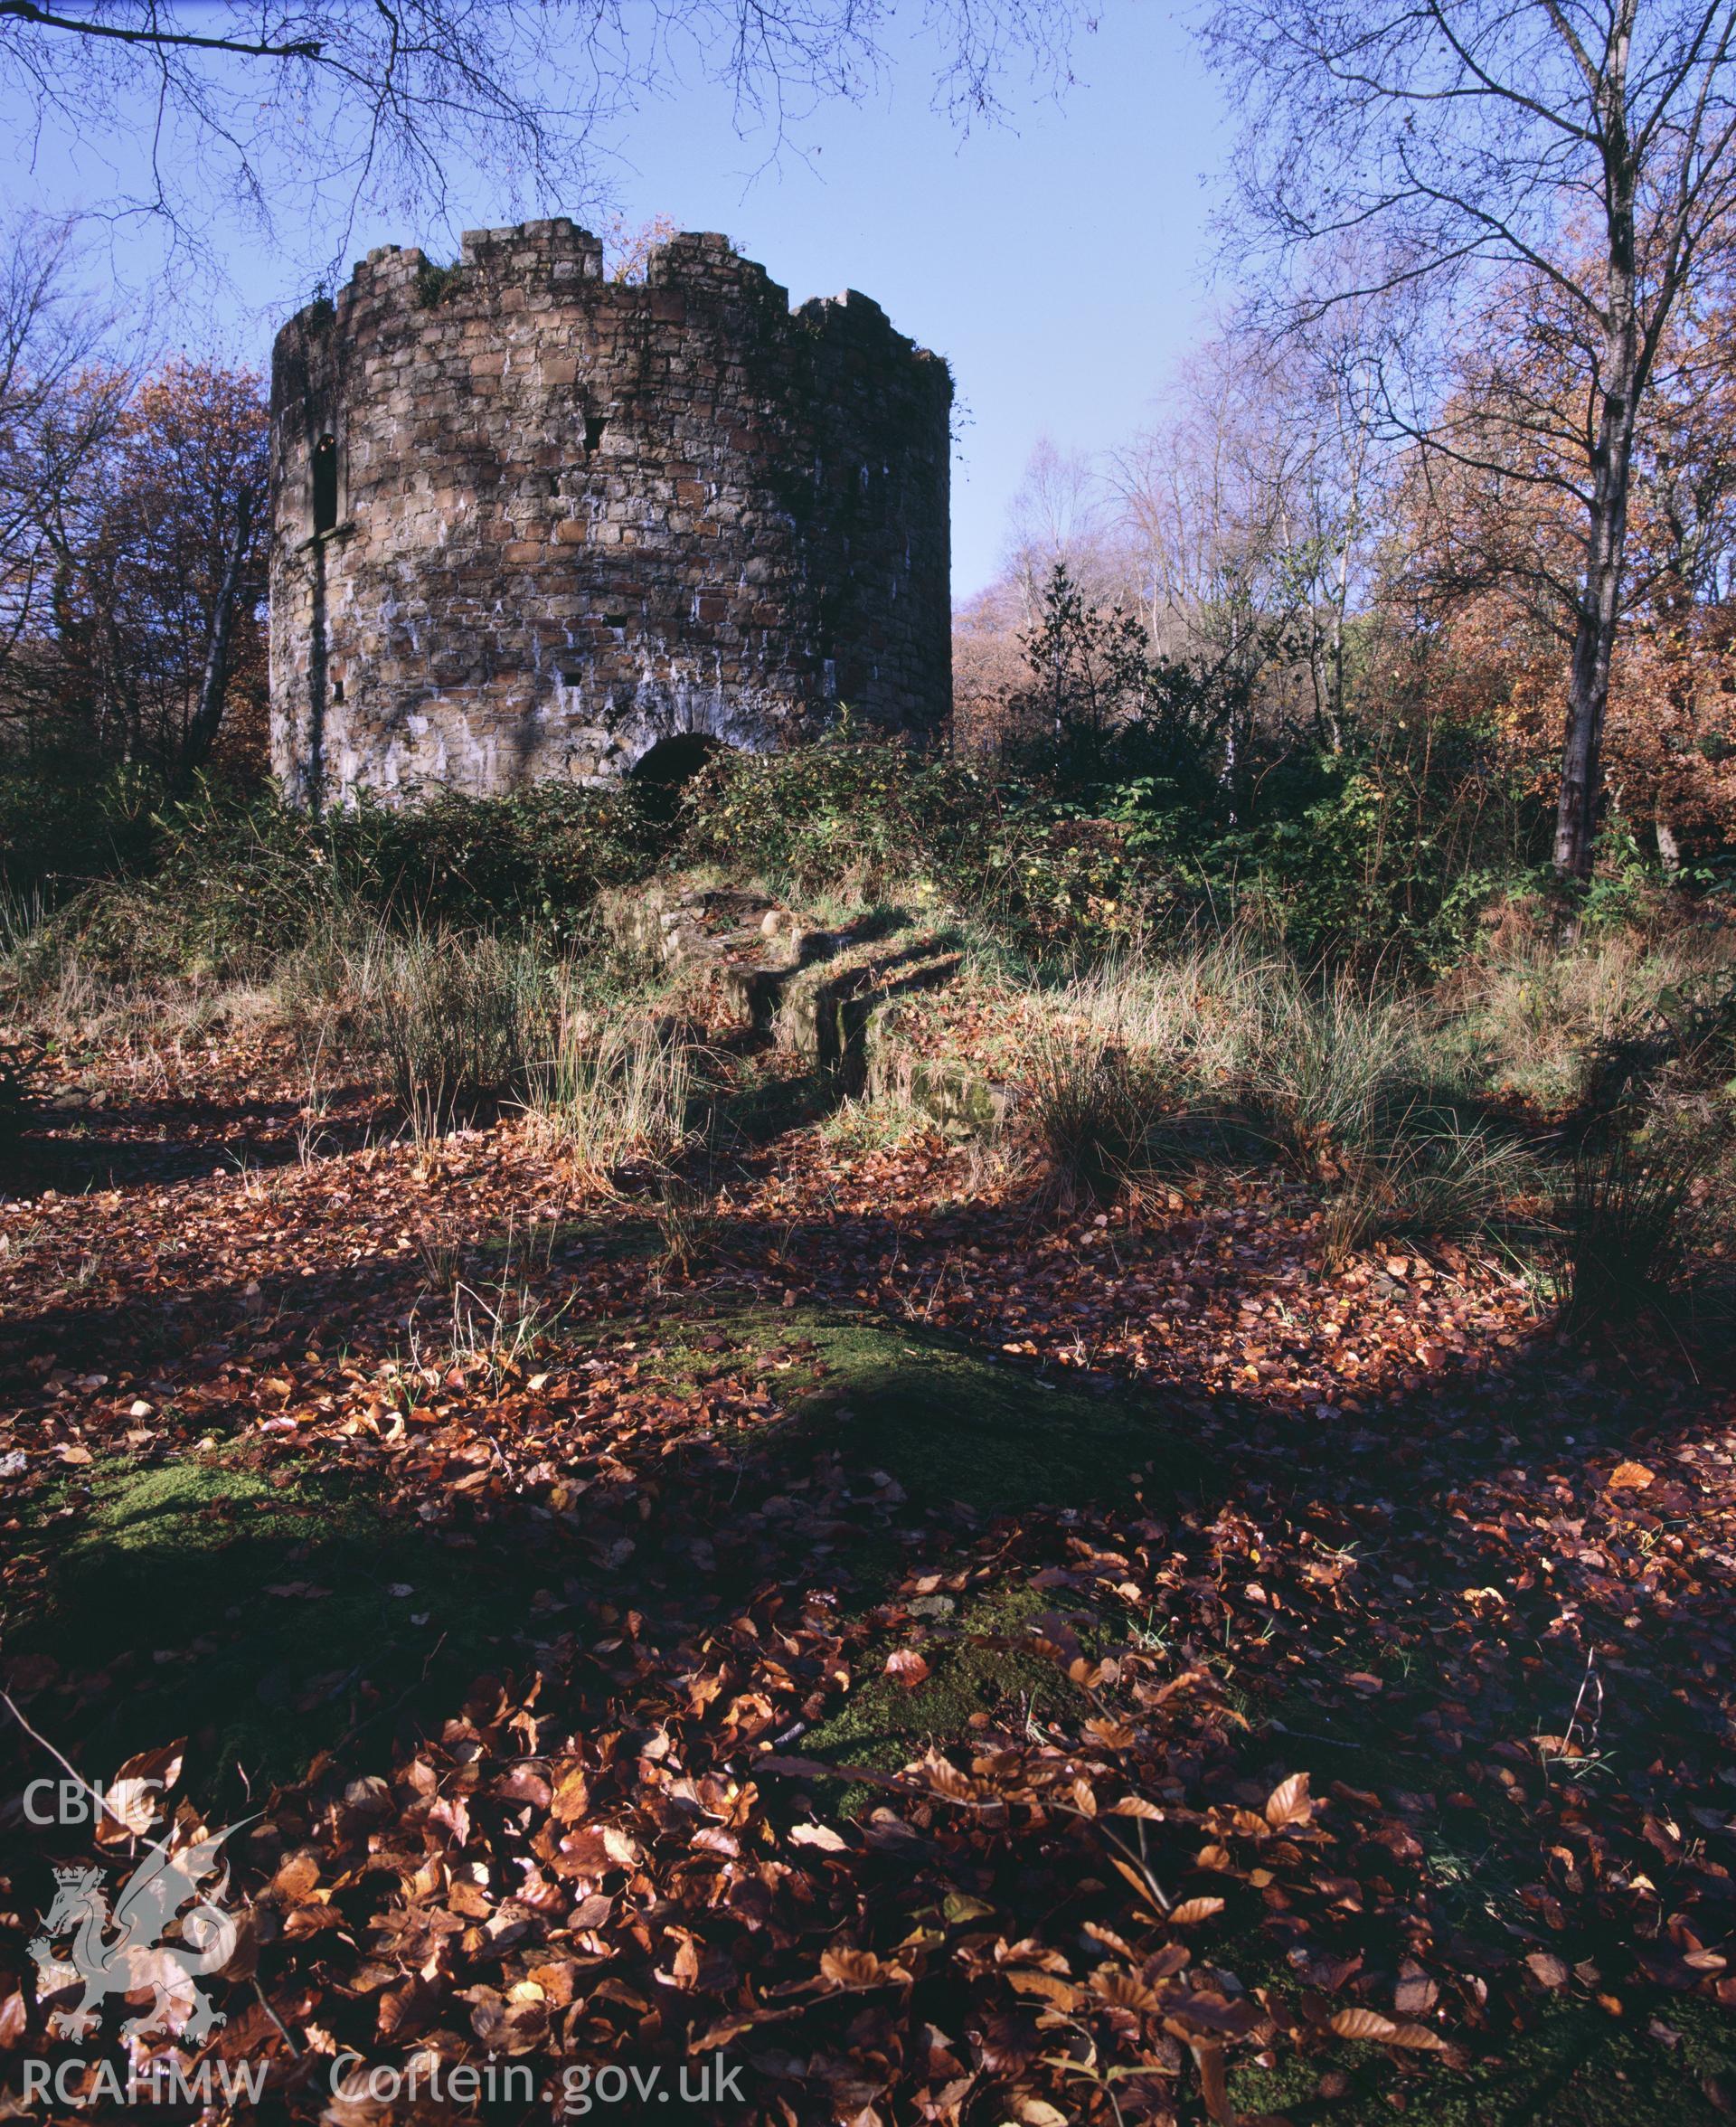 RCAHMW colour transparency showing the tower at Clyne Valley Arsenic Works, taken by Iain Wright, c.1981